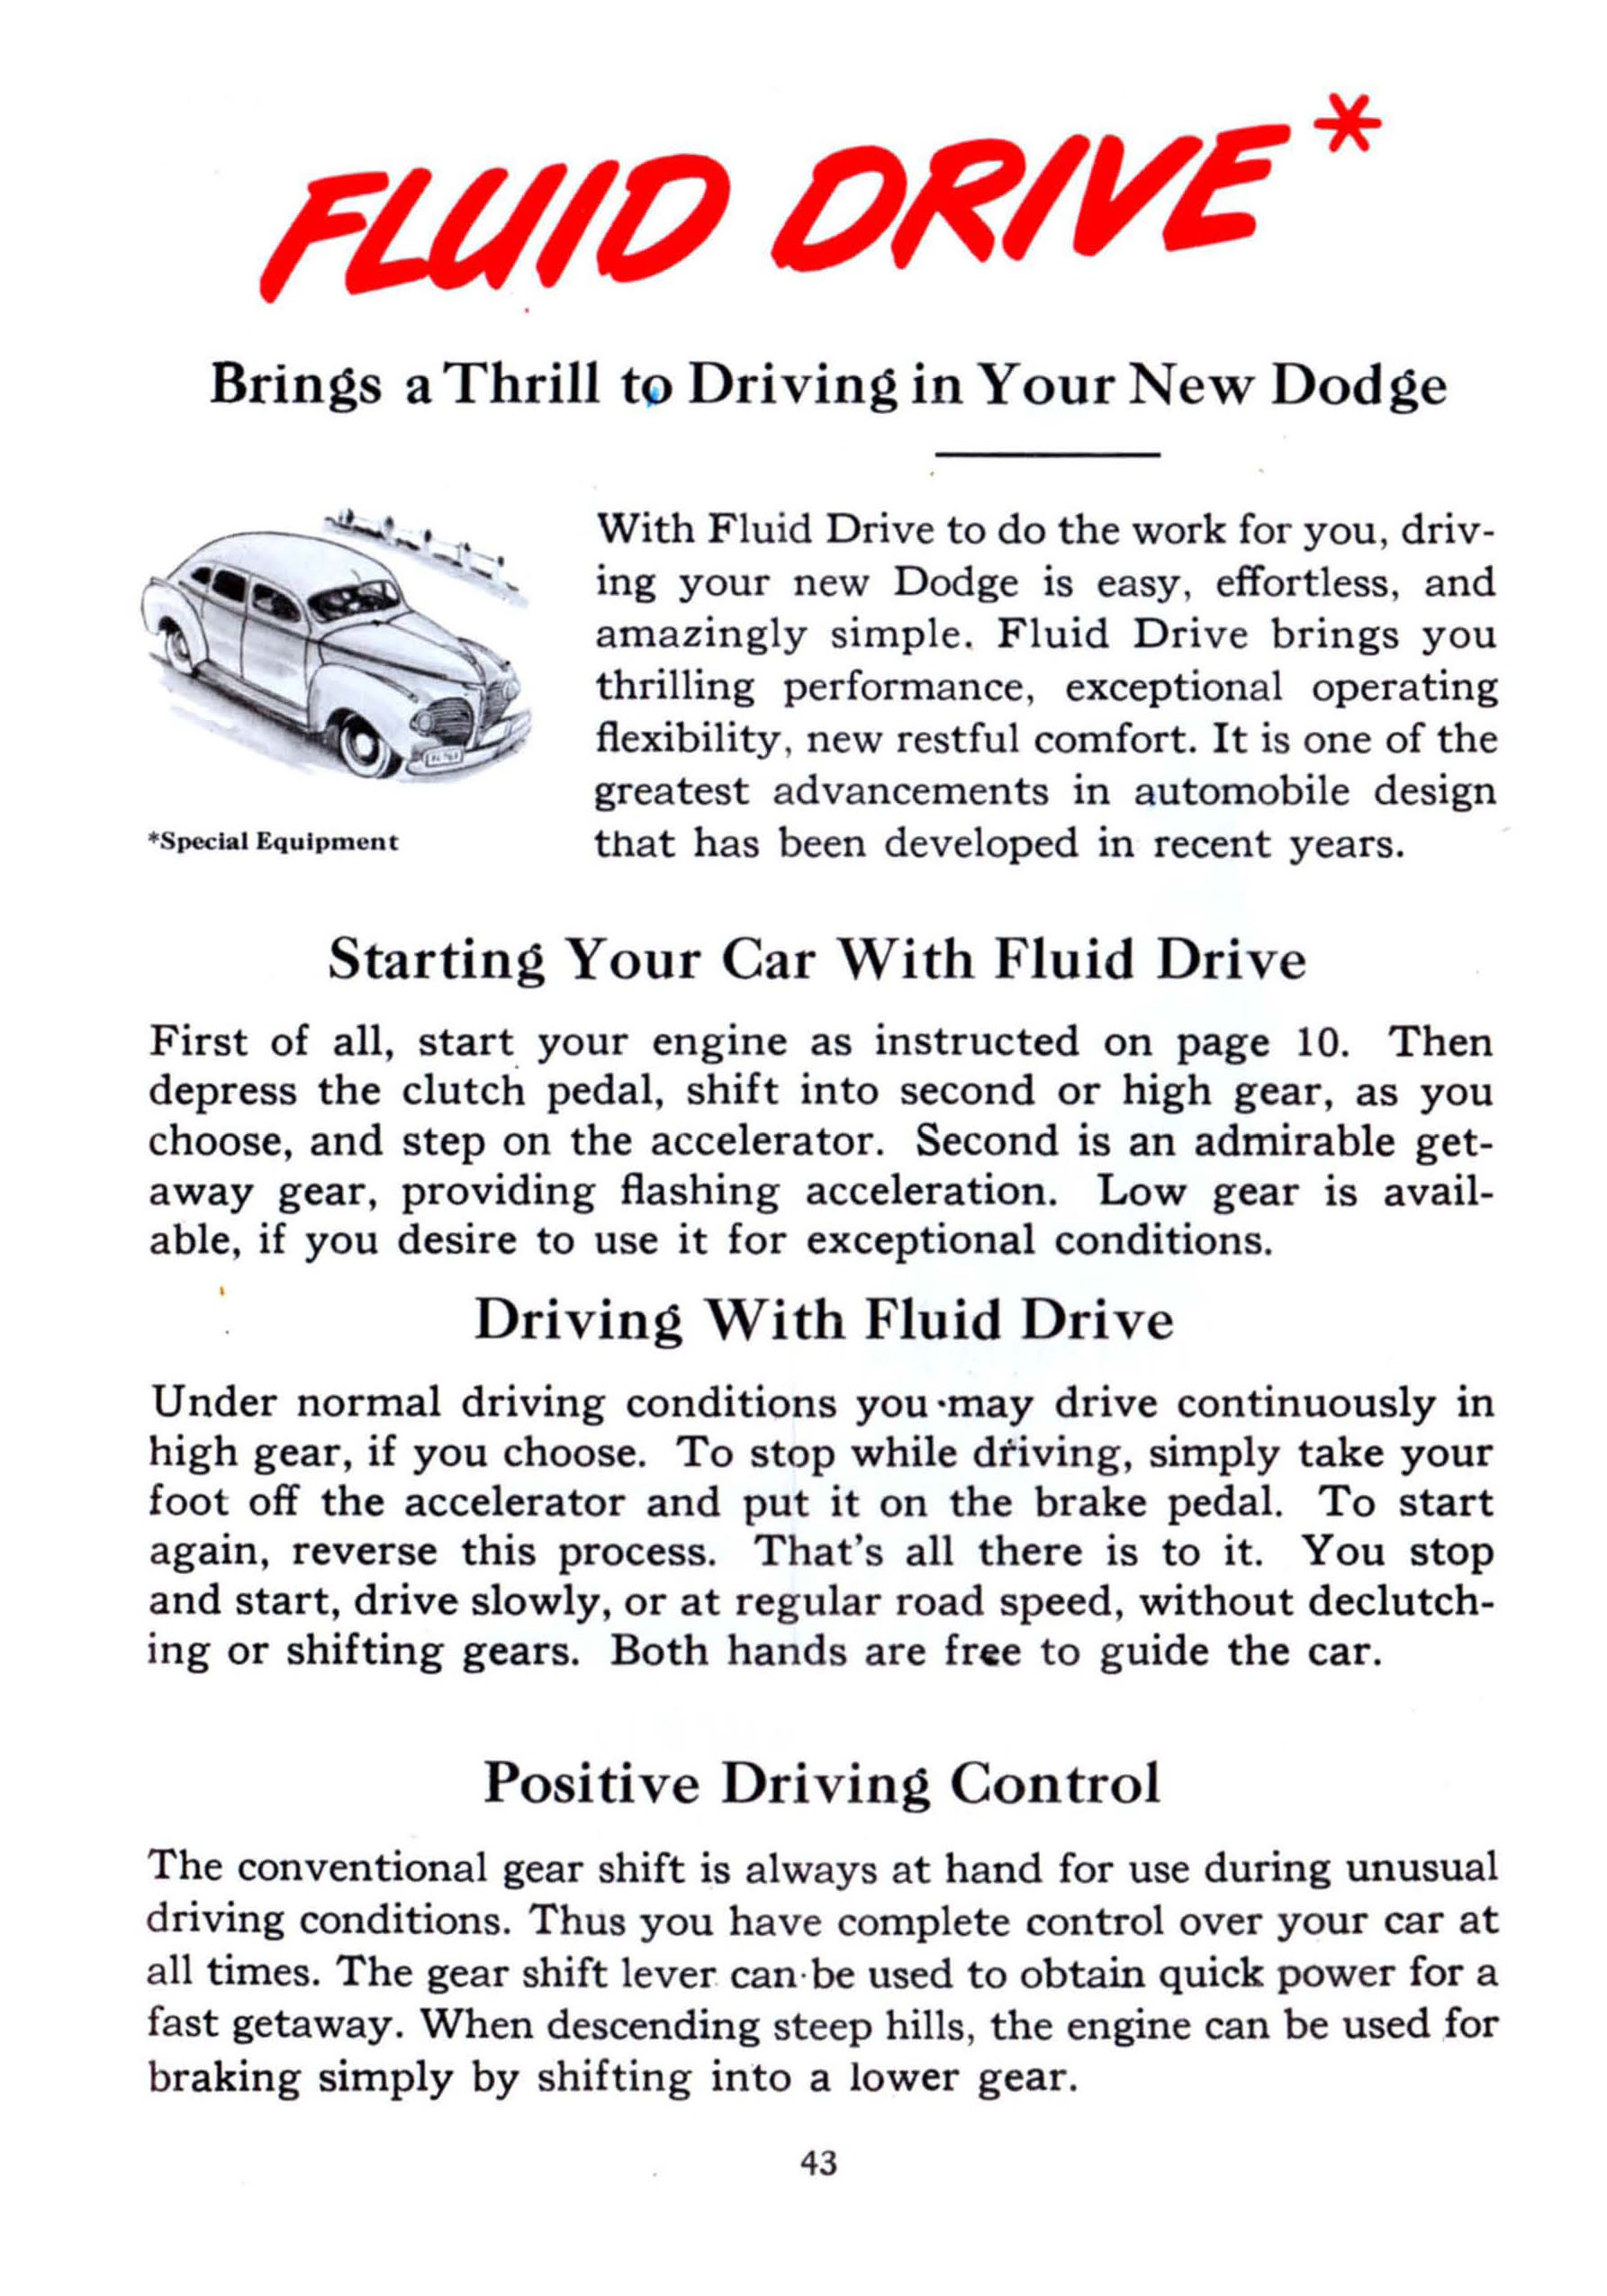 1941_Dodge_Owners_Manual-43